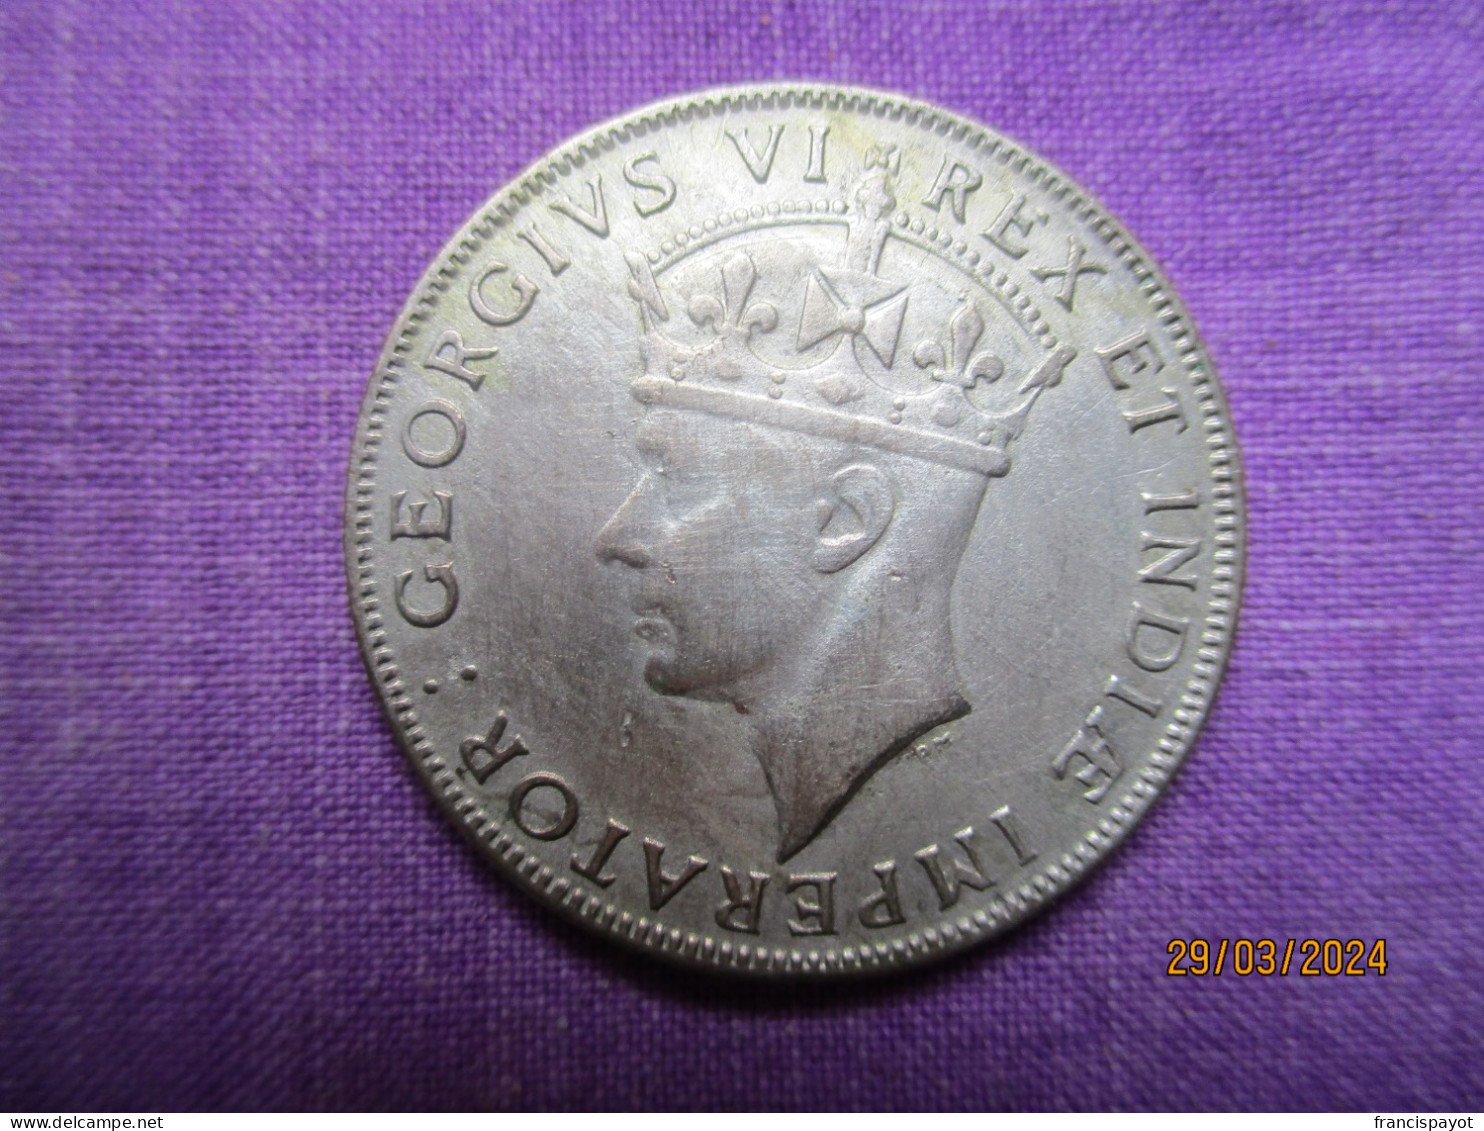 East Africa: 1 Shilling 1942 - Colonia Británica